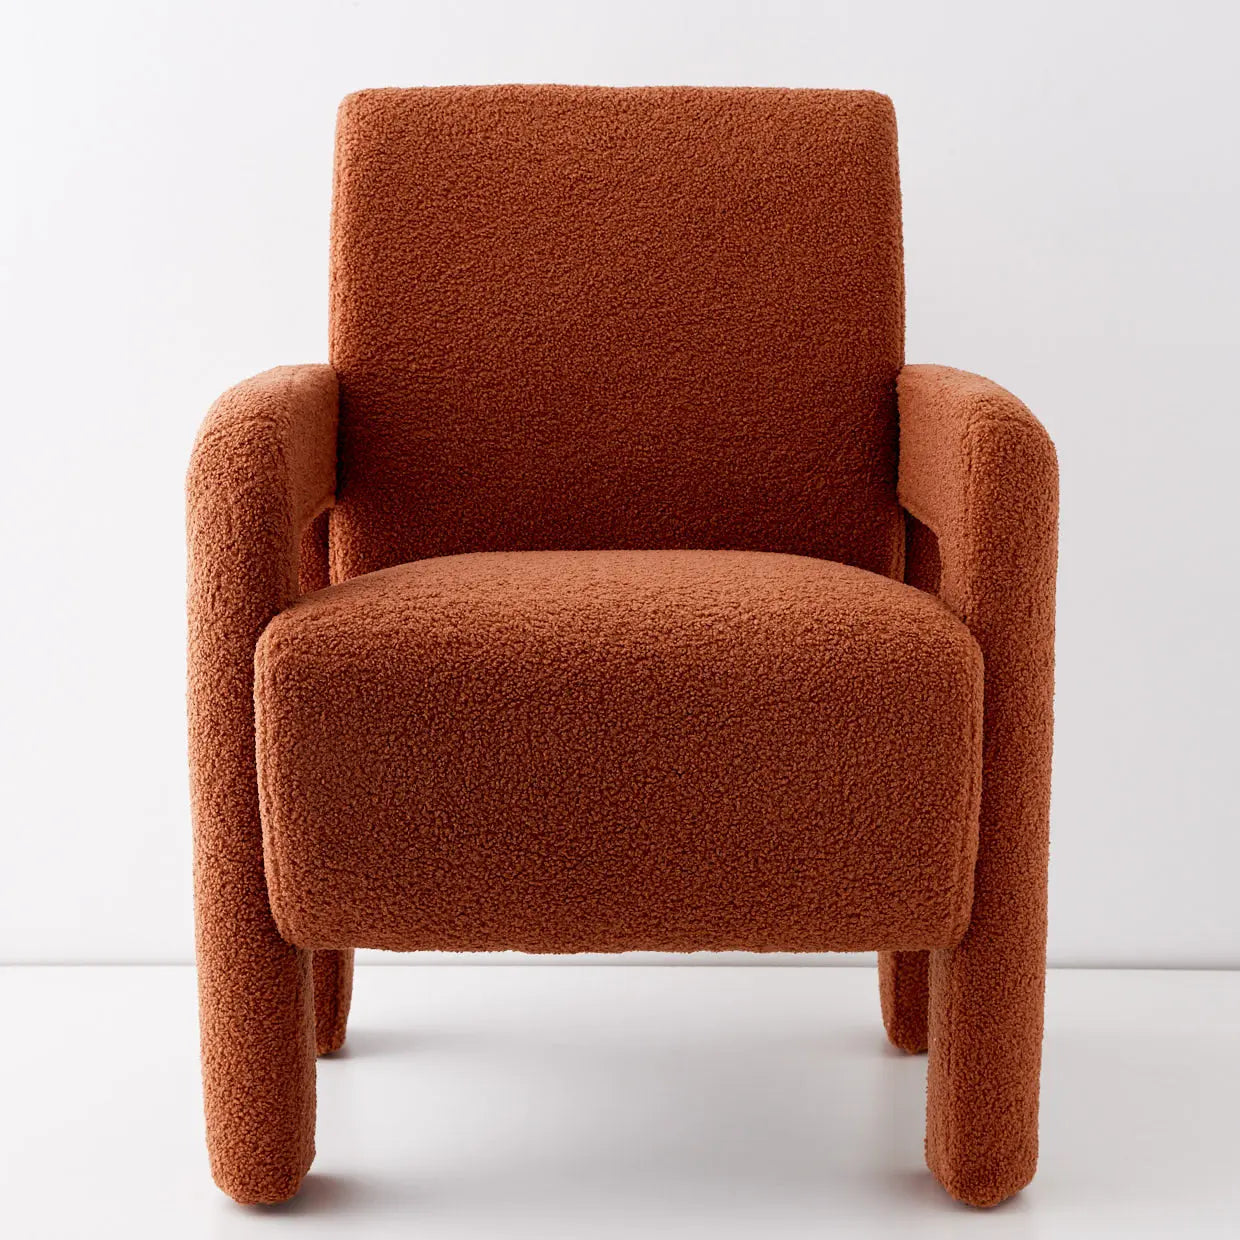 Boucle Accent Chair Terracotta - GigiandTom